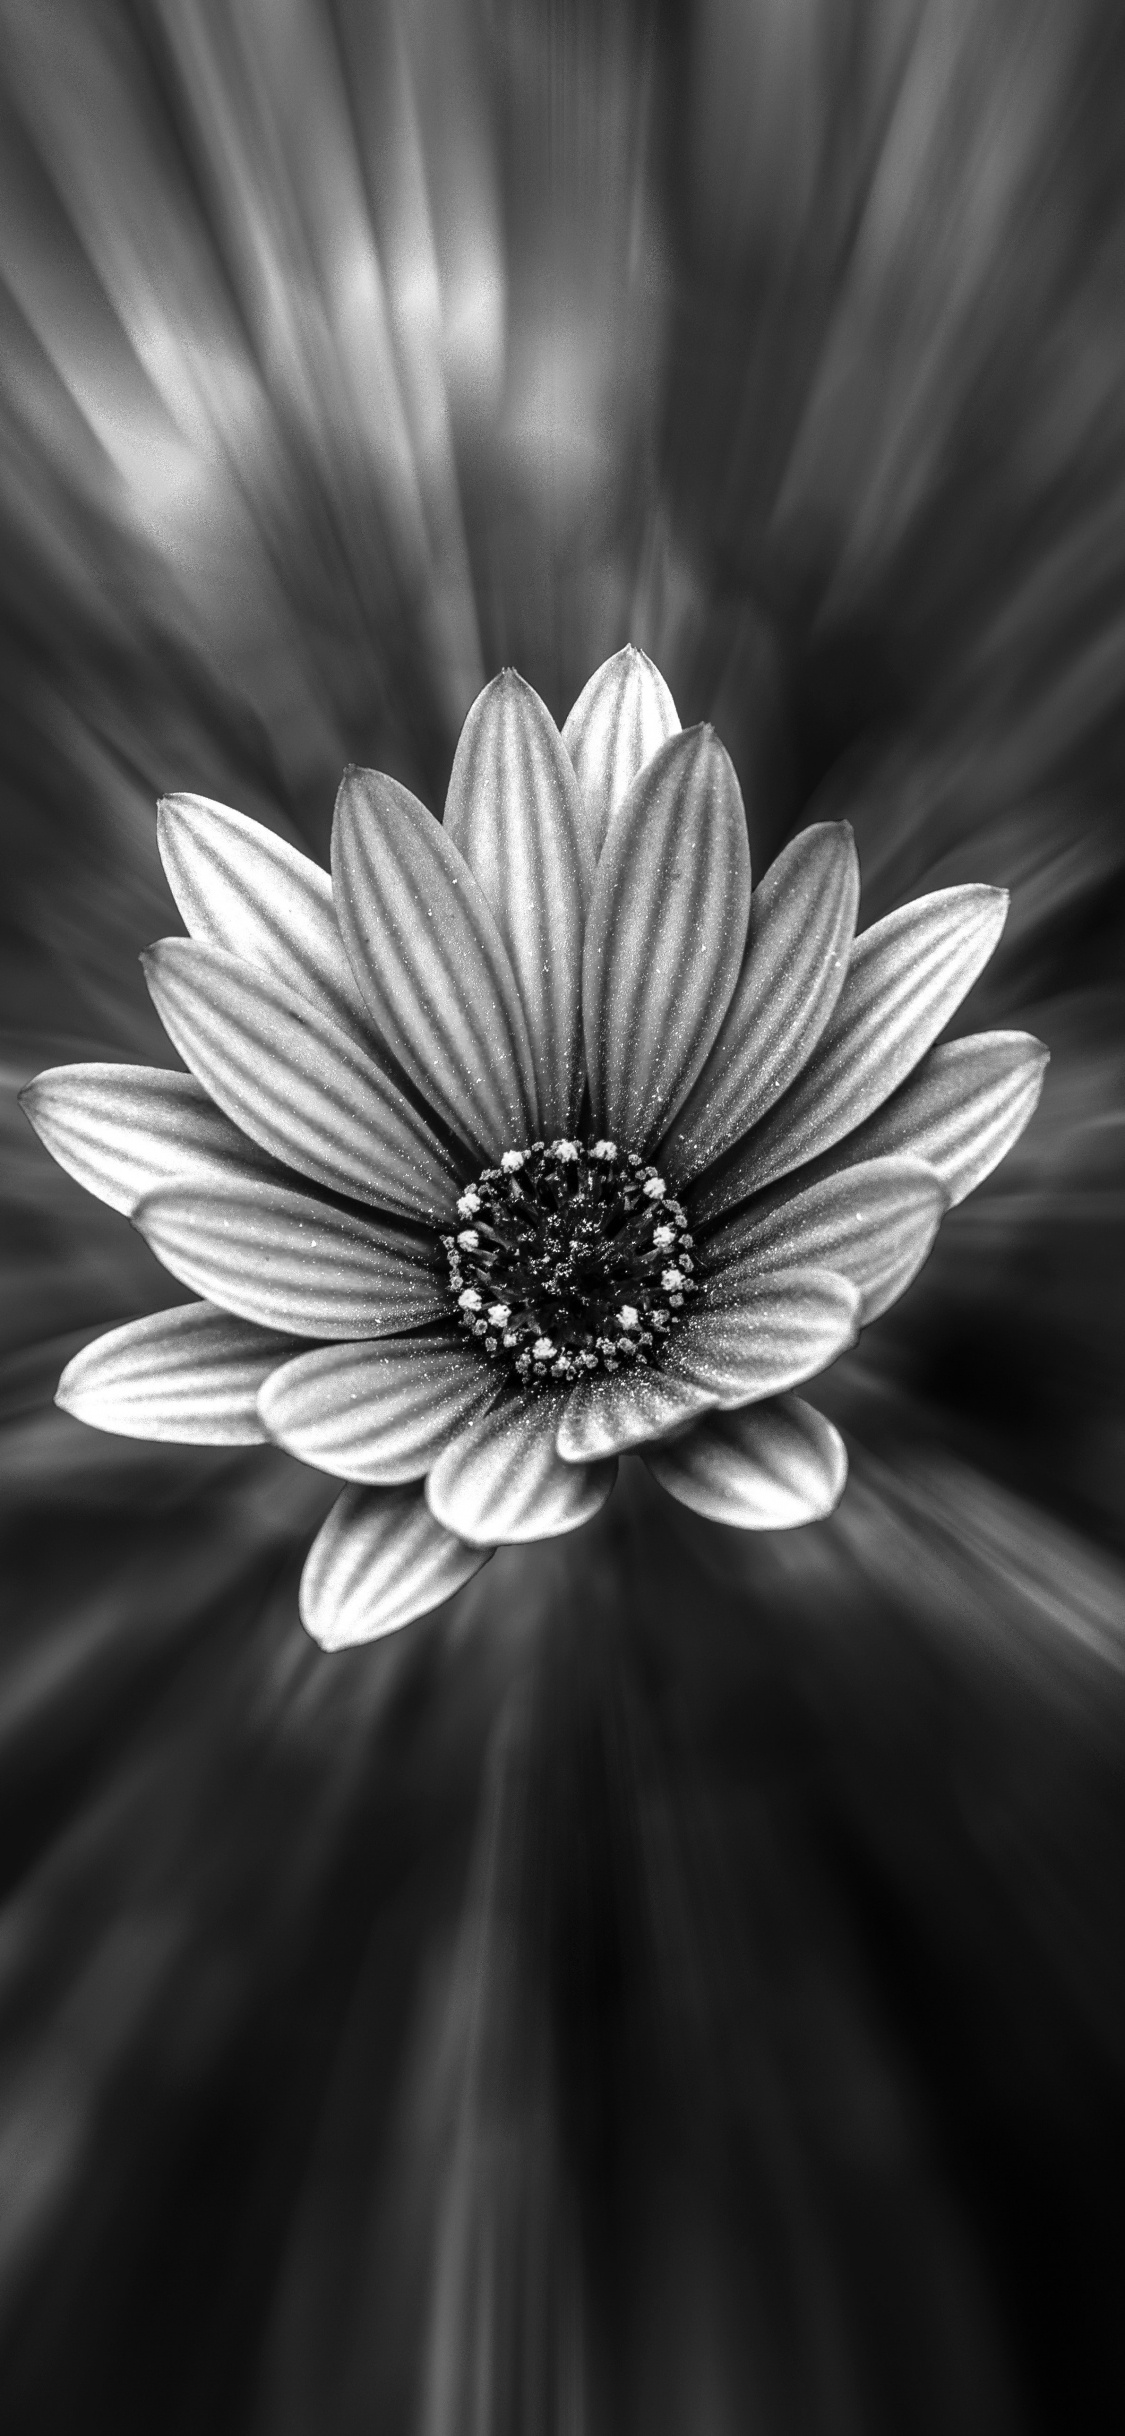 Grayscale Photo of a Flower. Wallpaper in 1125x2436 Resolution